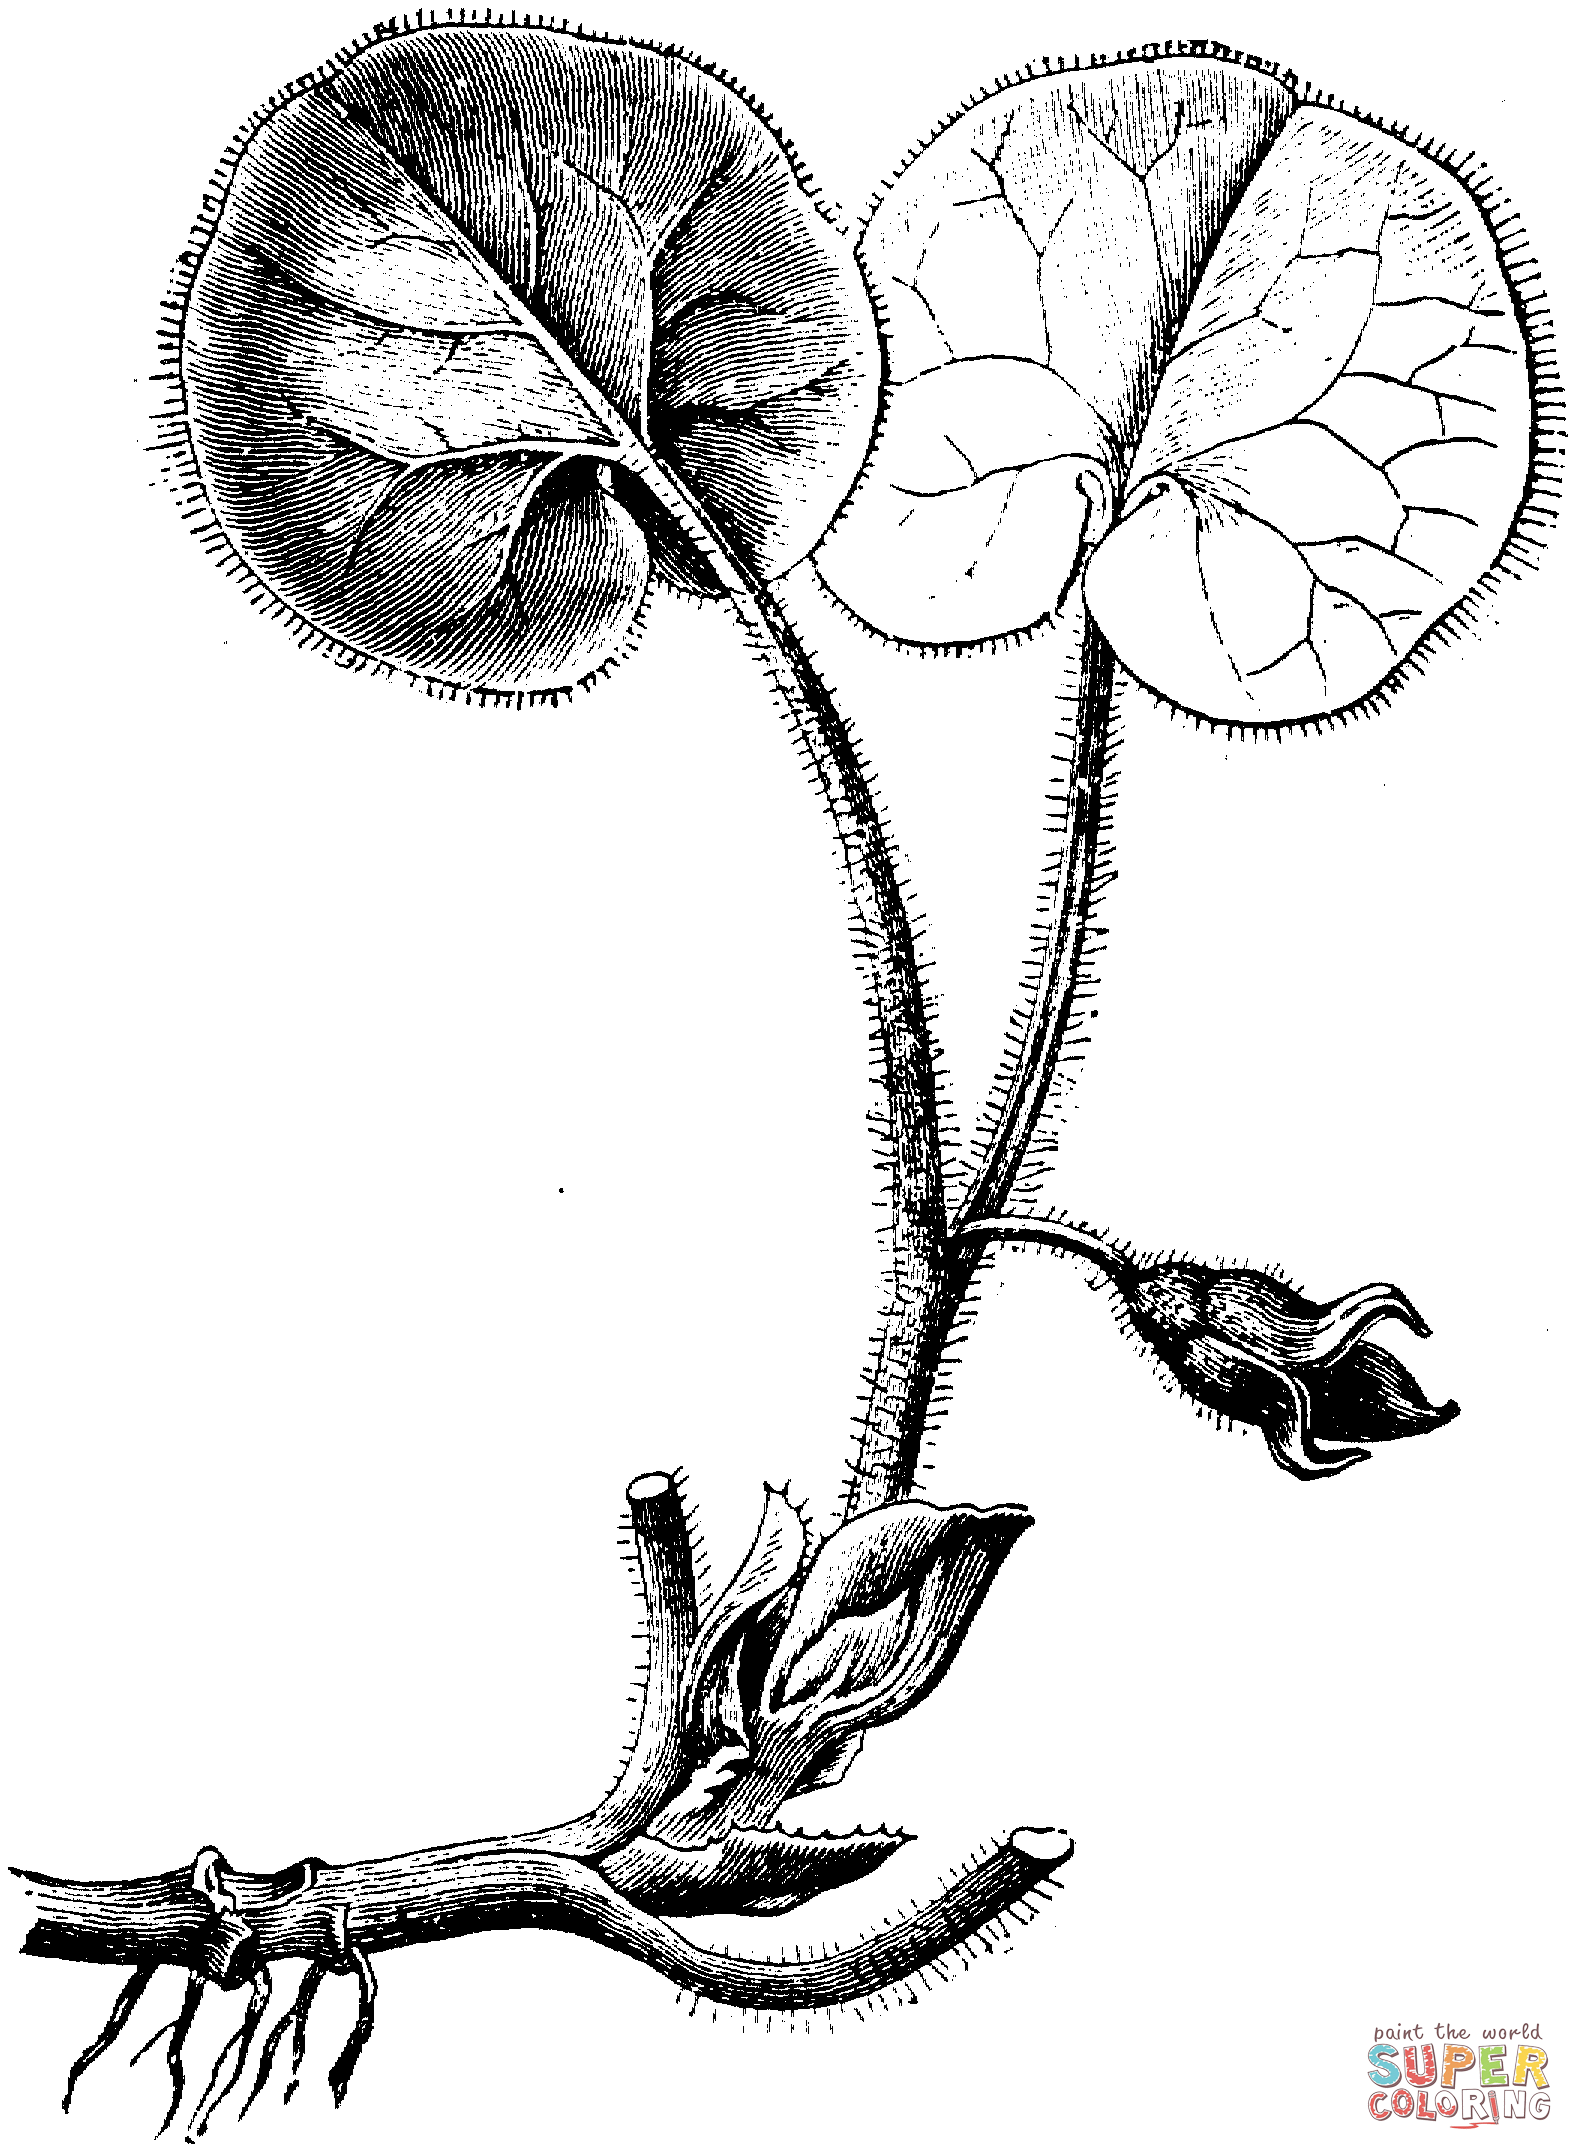 Asarum Europaeum Or European Wild Ginger Coloring Pages